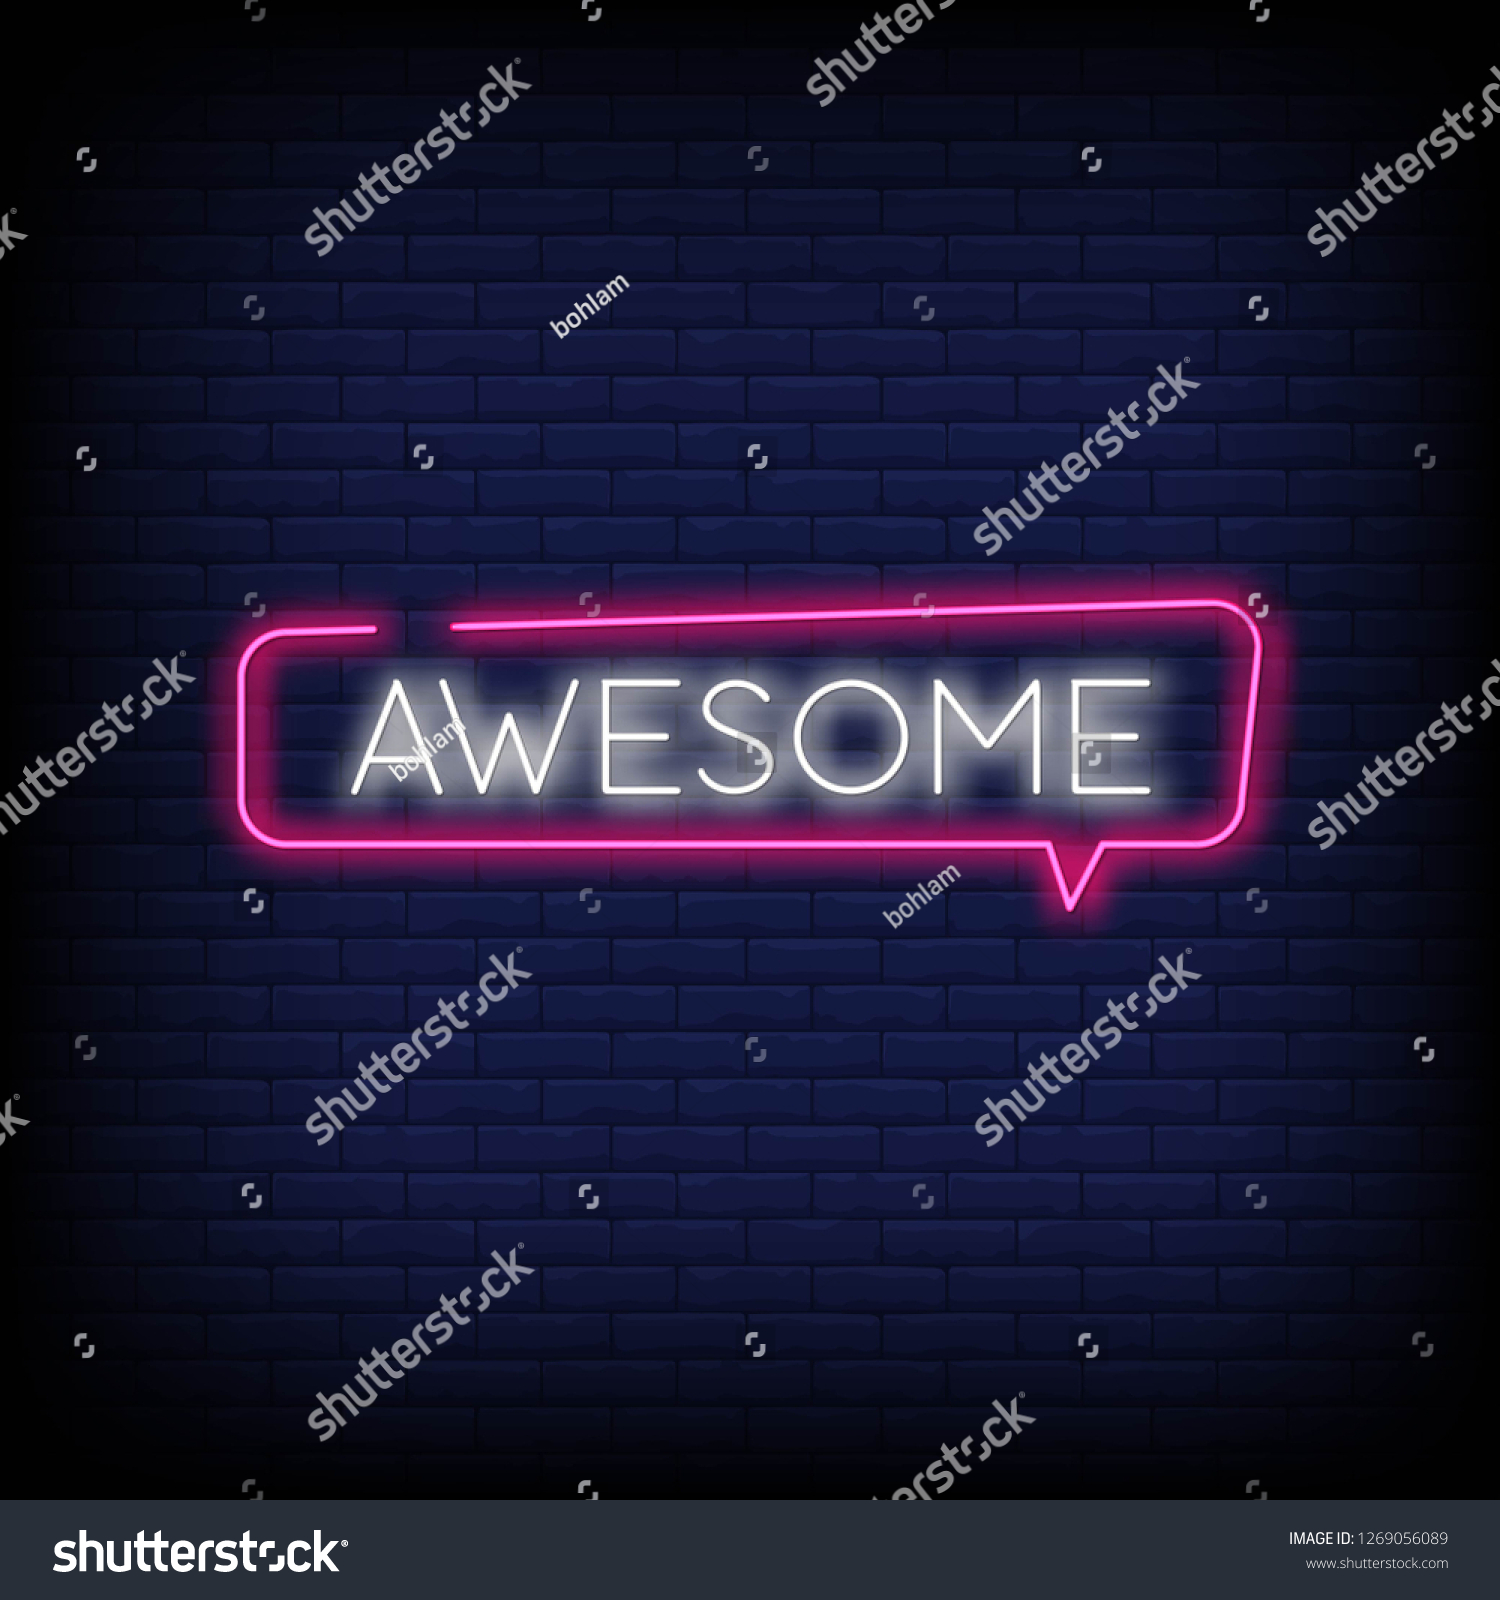 Awesome Neon Text Vector Brick Wall Stock Royalty